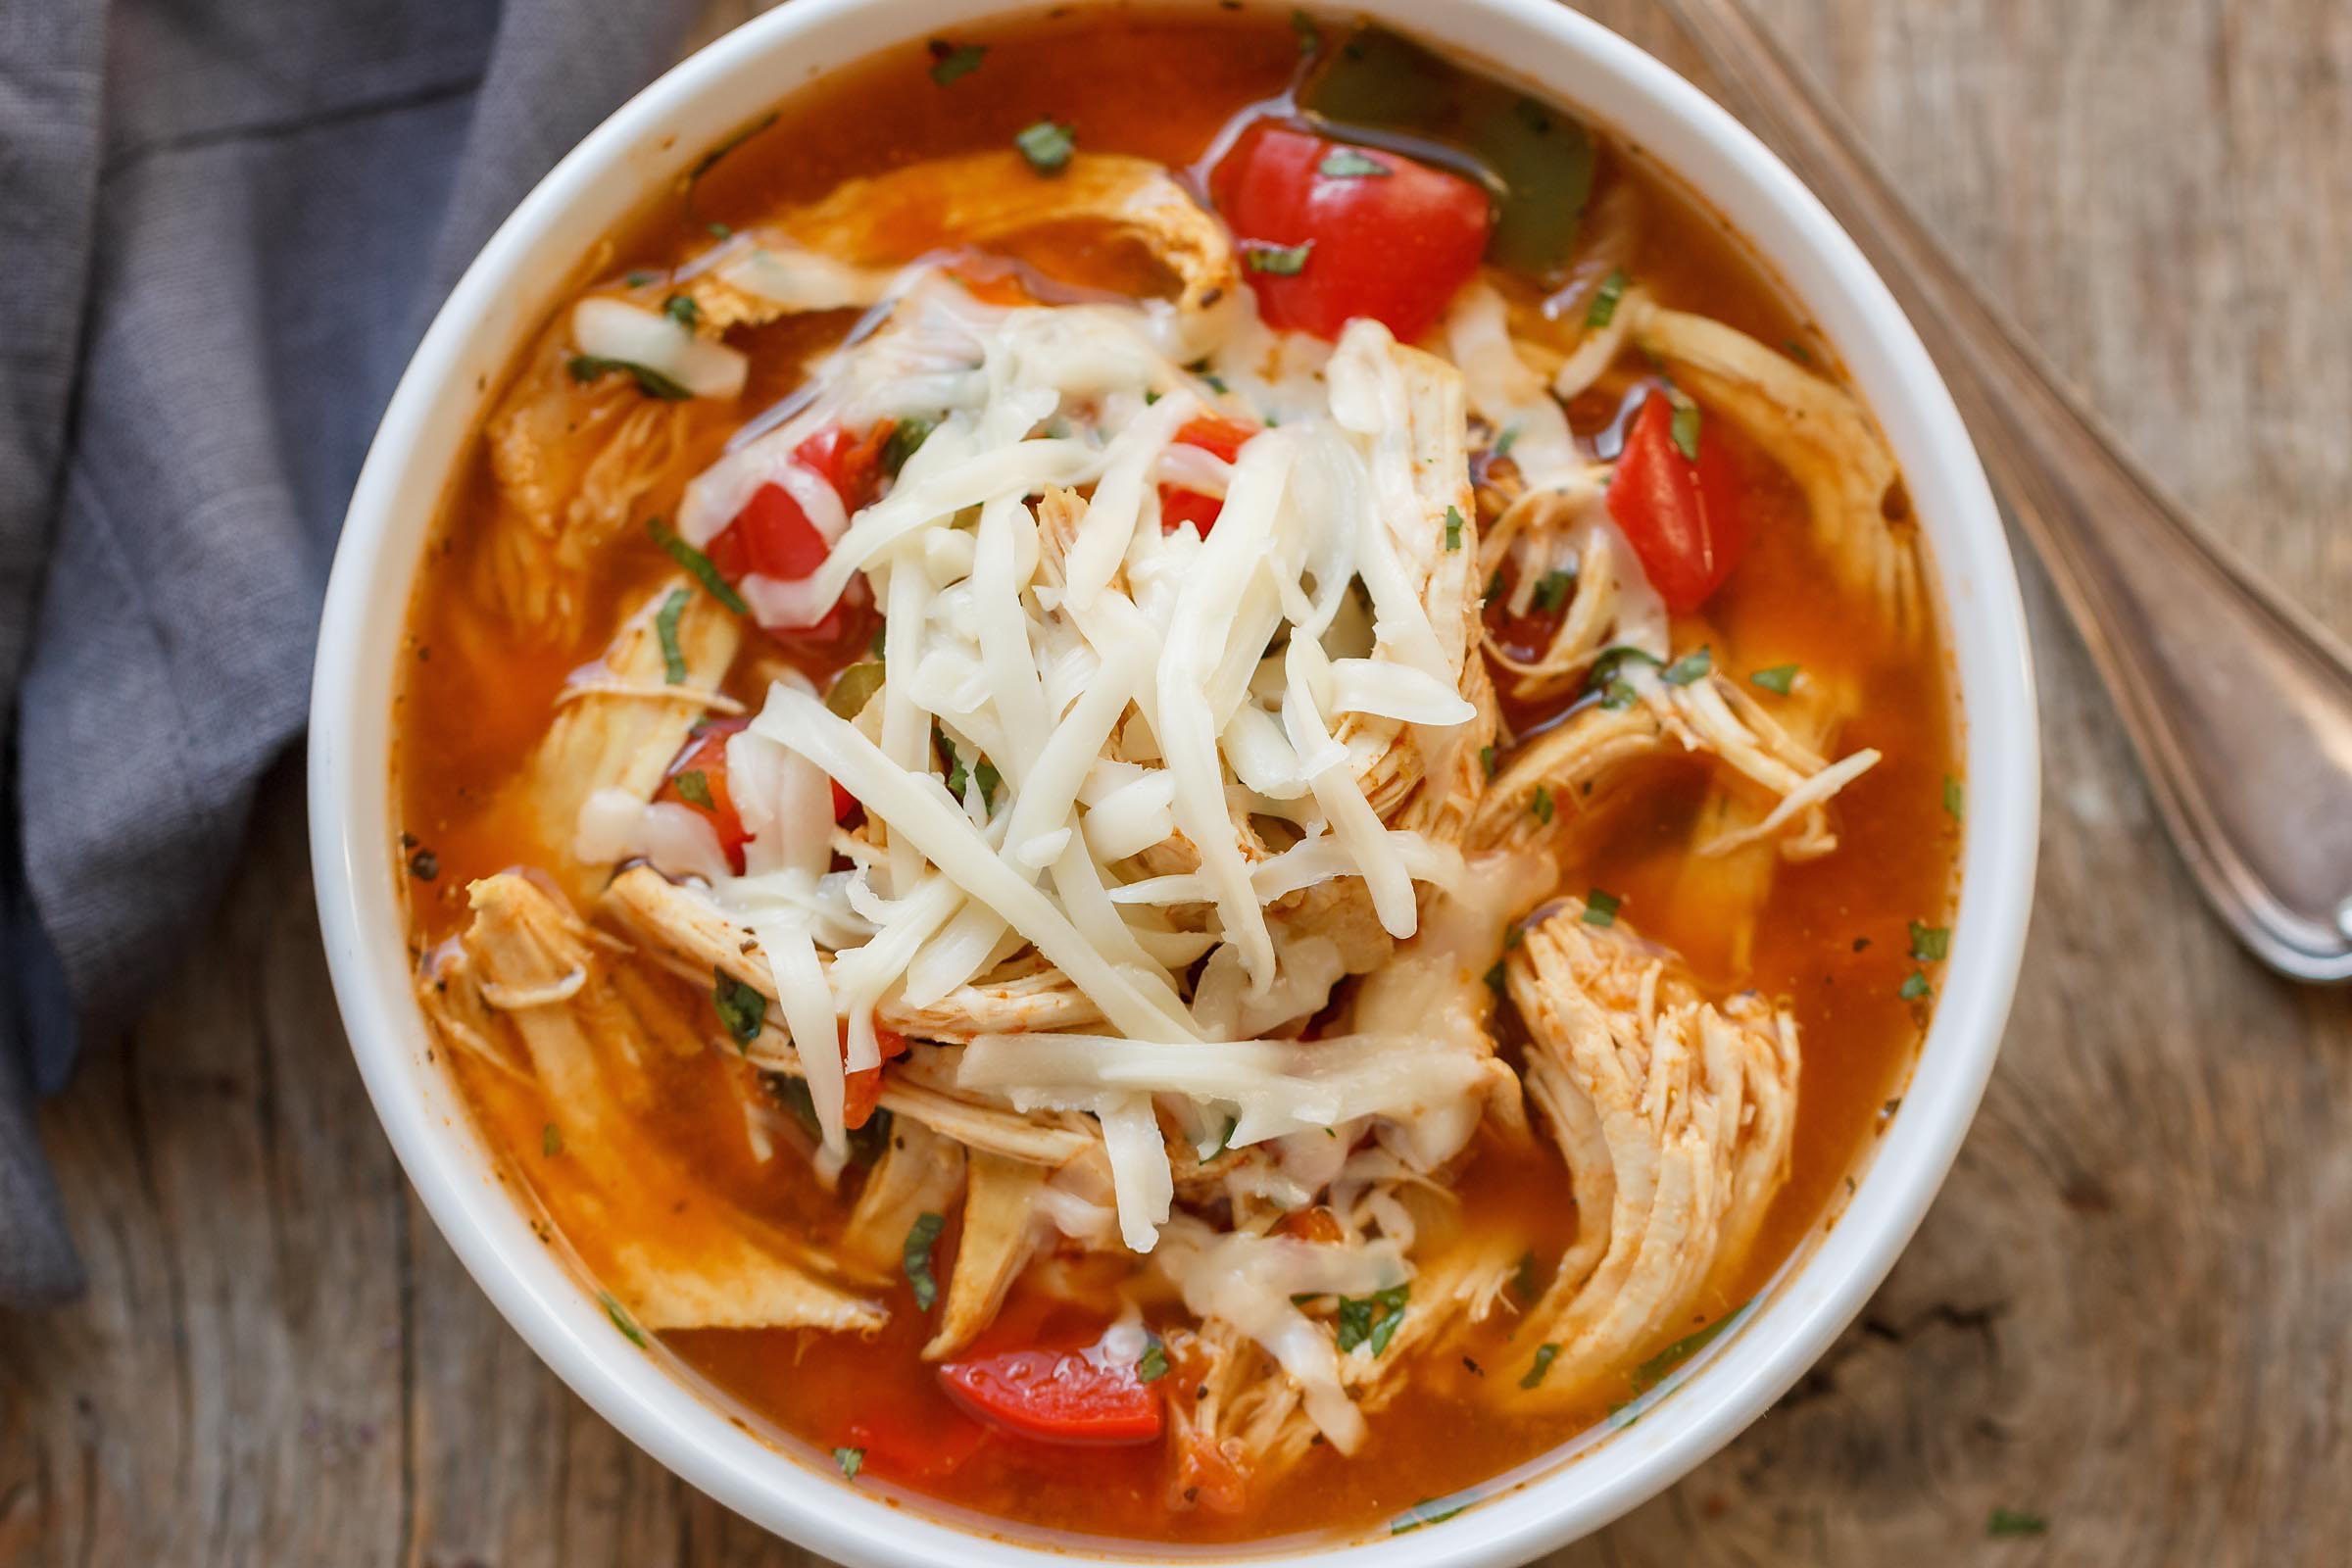 Chicken Soup Recipes: 16 Chicken Soups to Eat Clean & Delicious